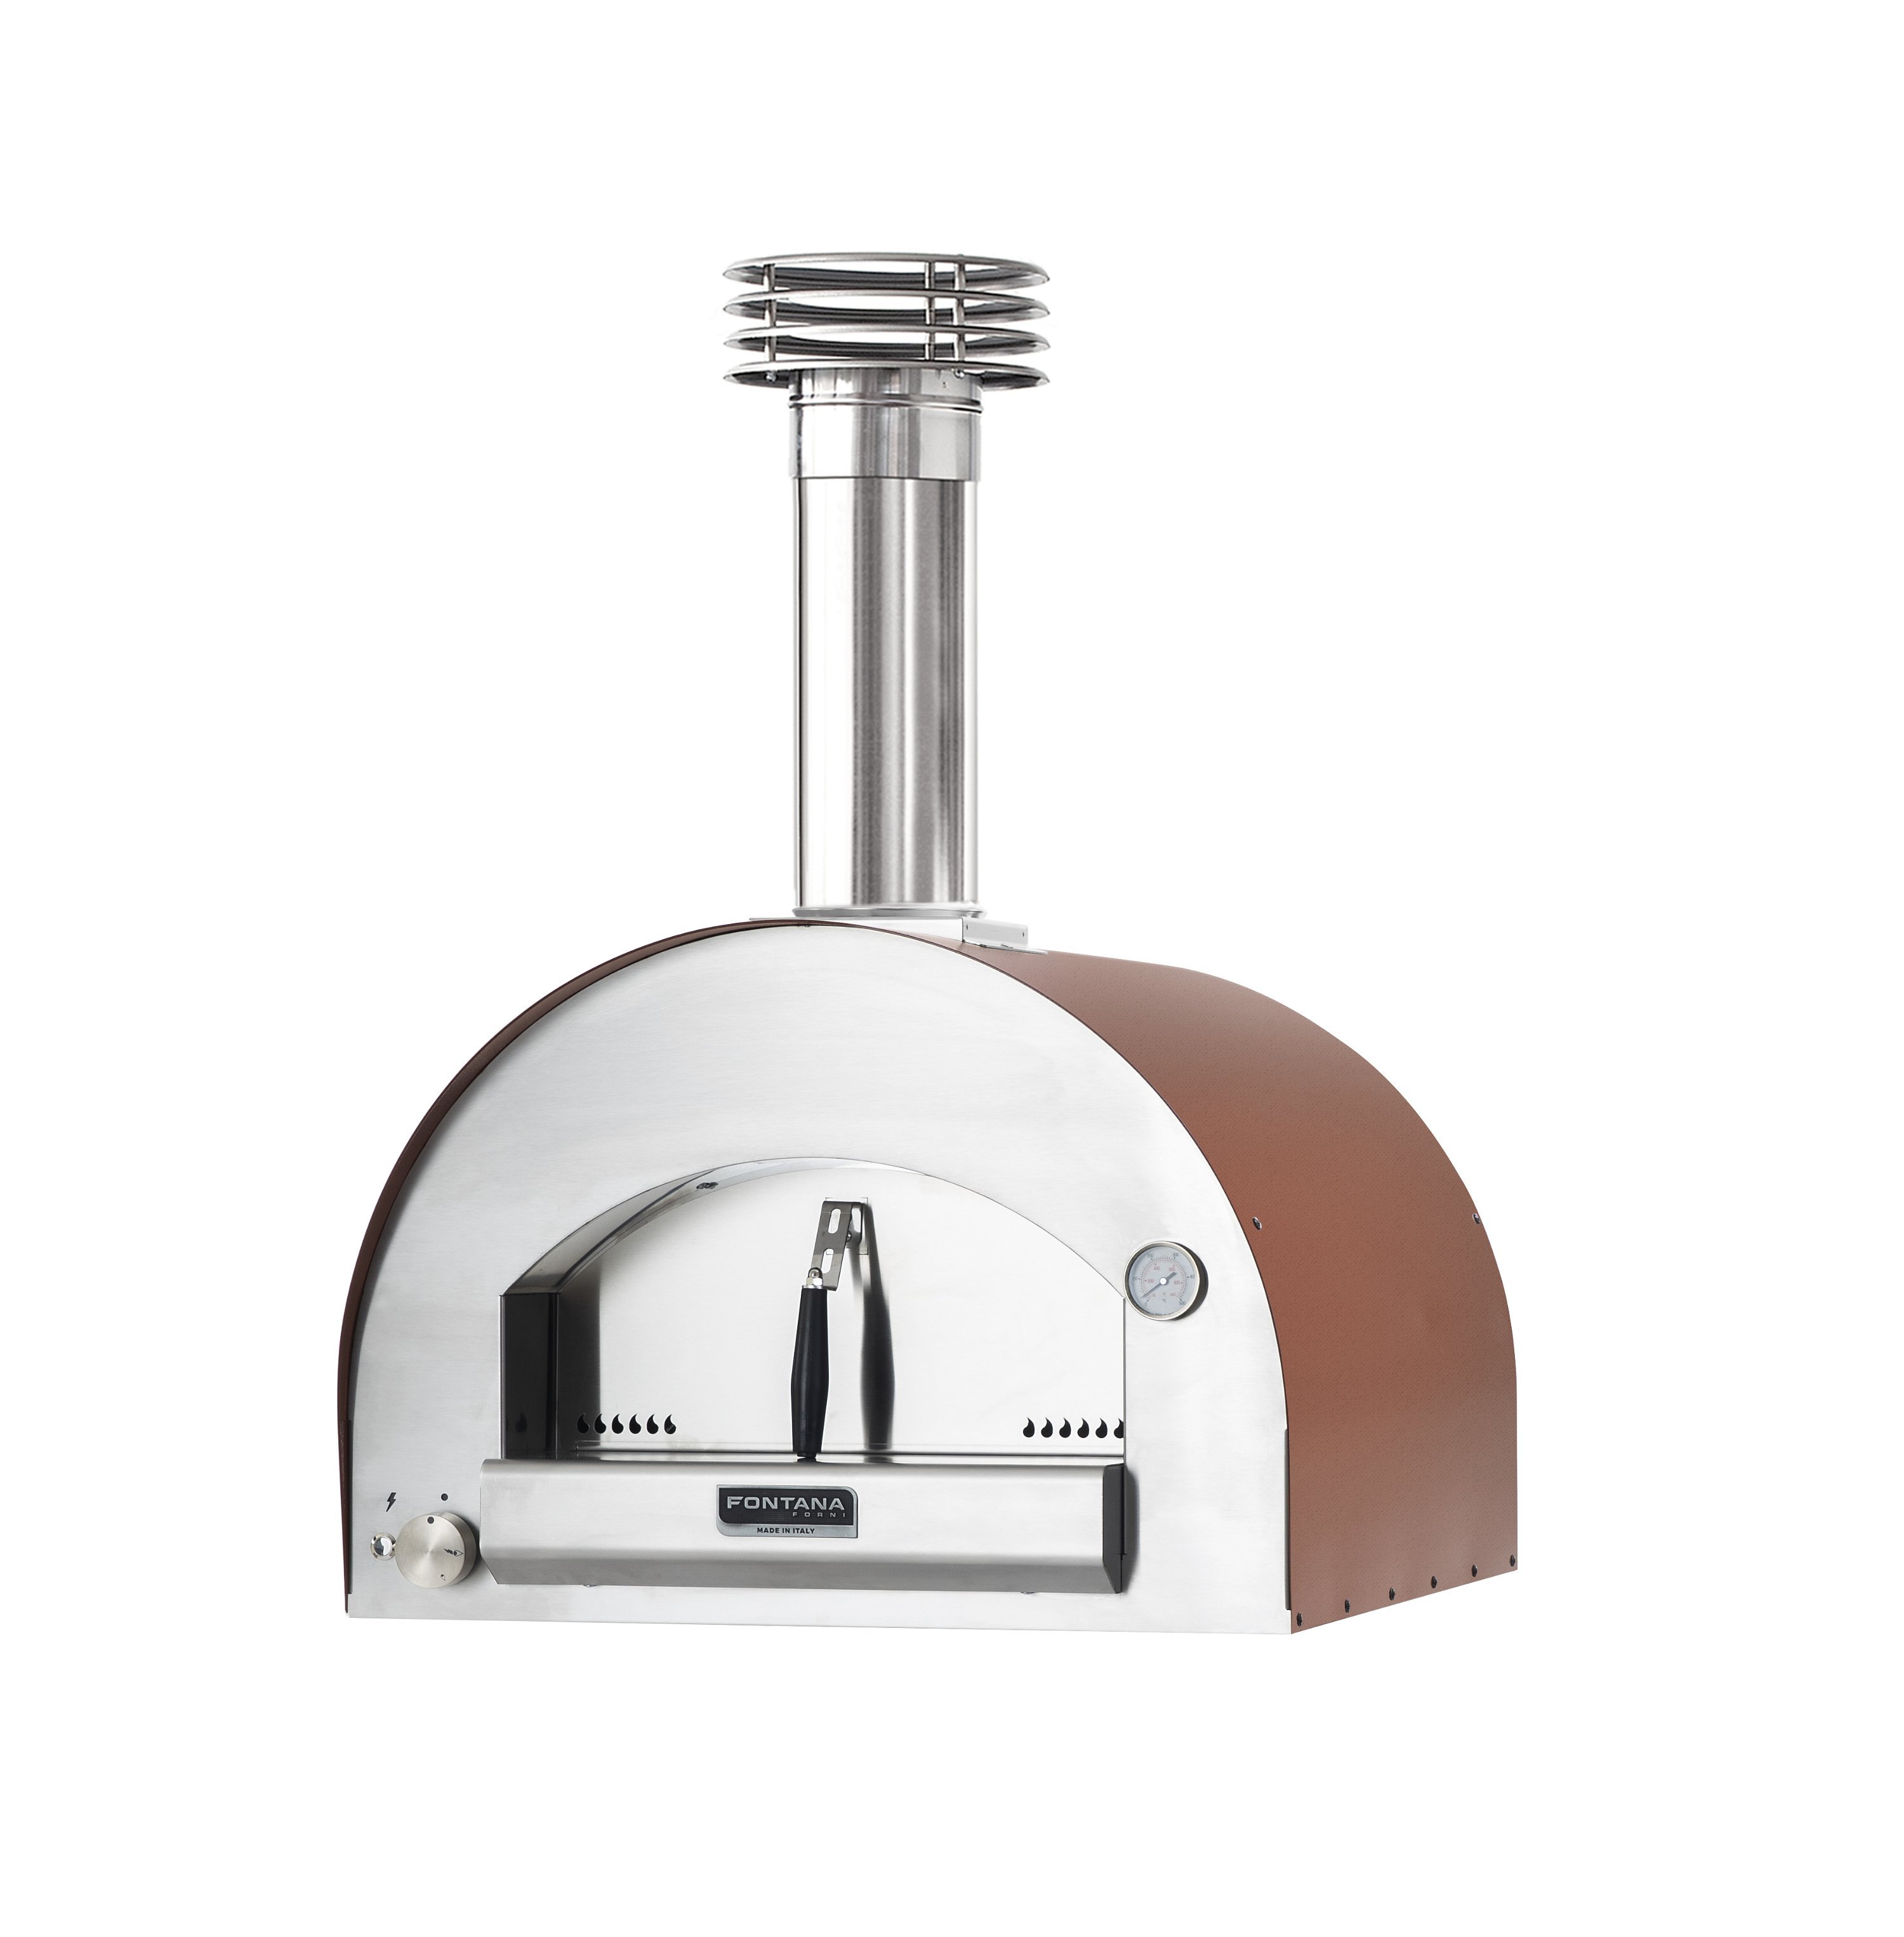 Dome oven Fontana Margherita with gas firing, pizza oven for outdoor kitchen